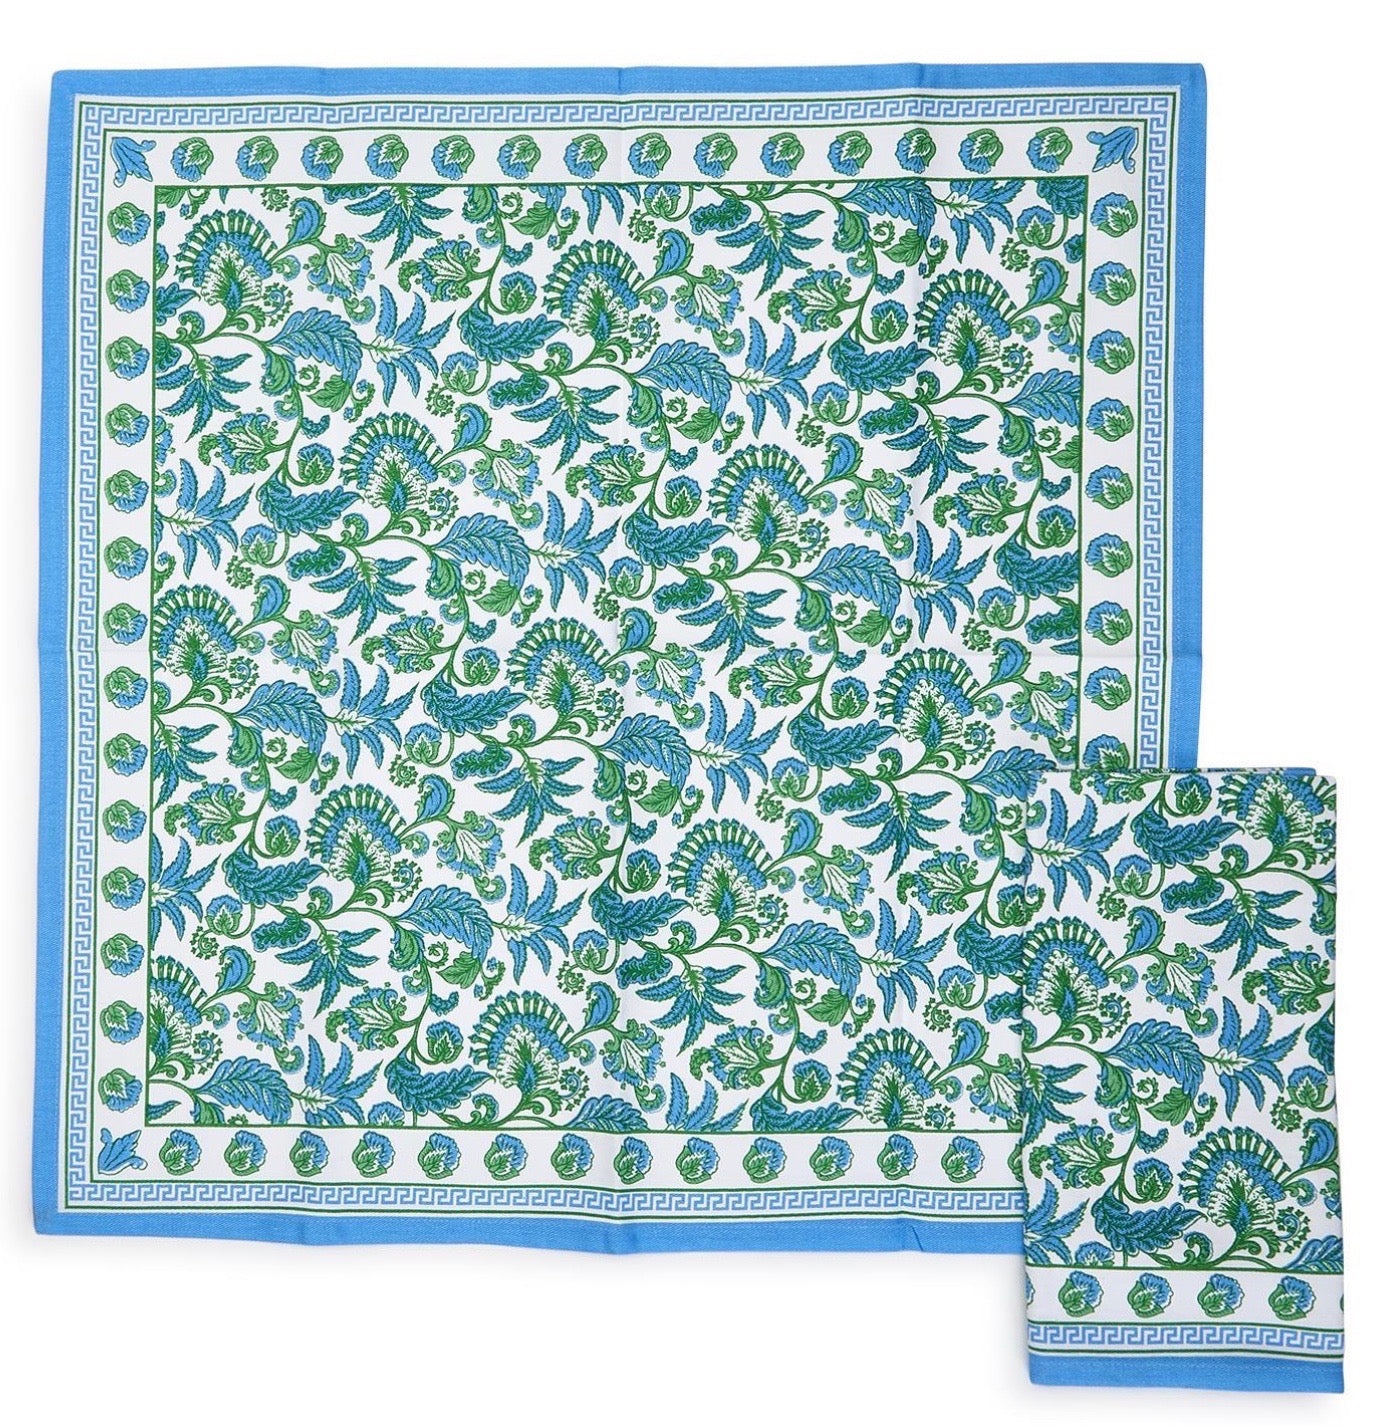 Cloth Napkins in Blue and Green Floral